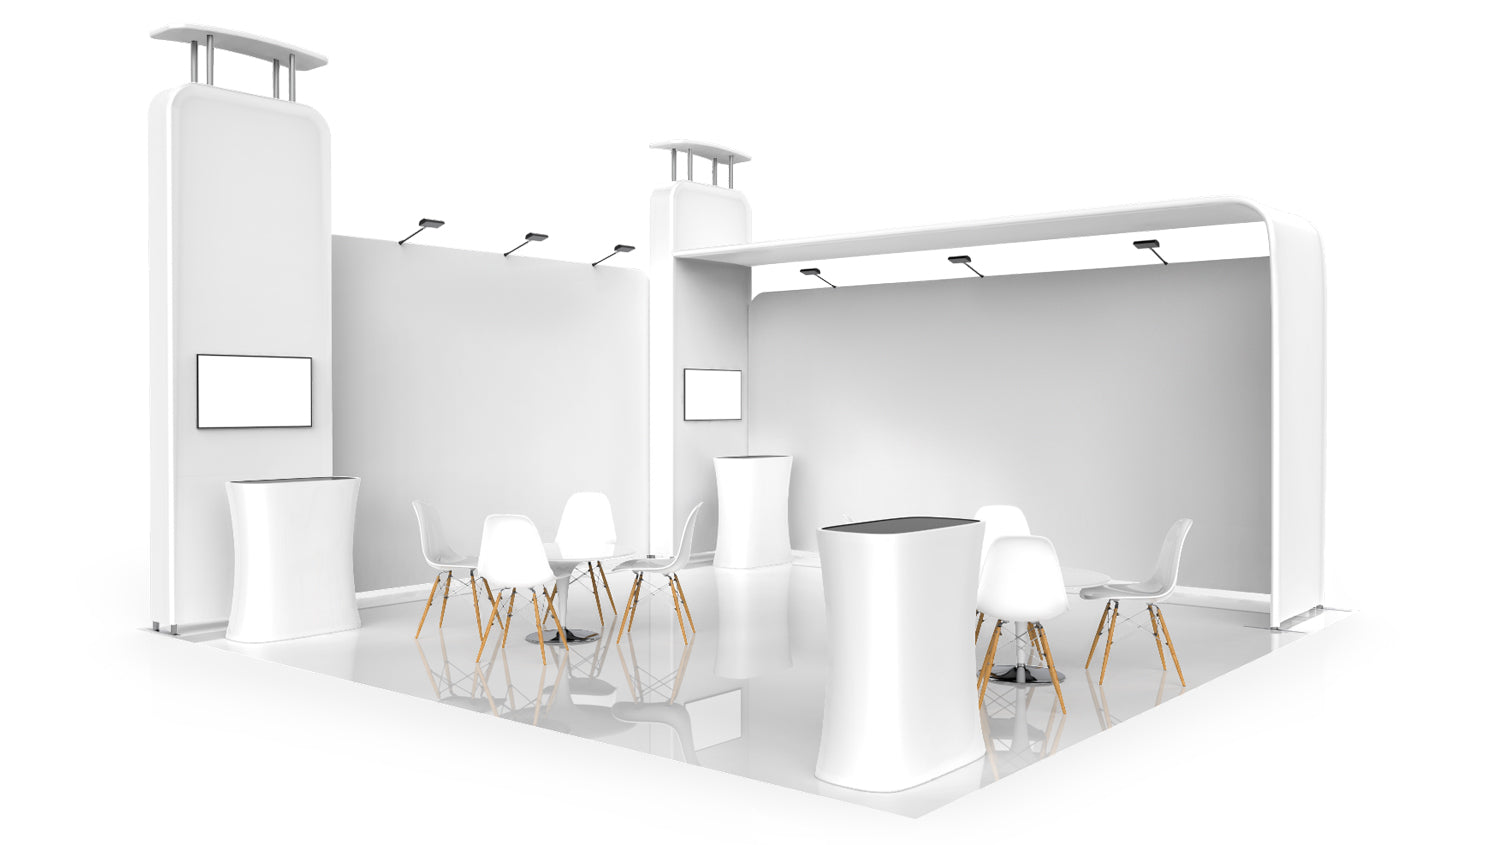 20x20 booth layout 3D model Pro-Package C corner view